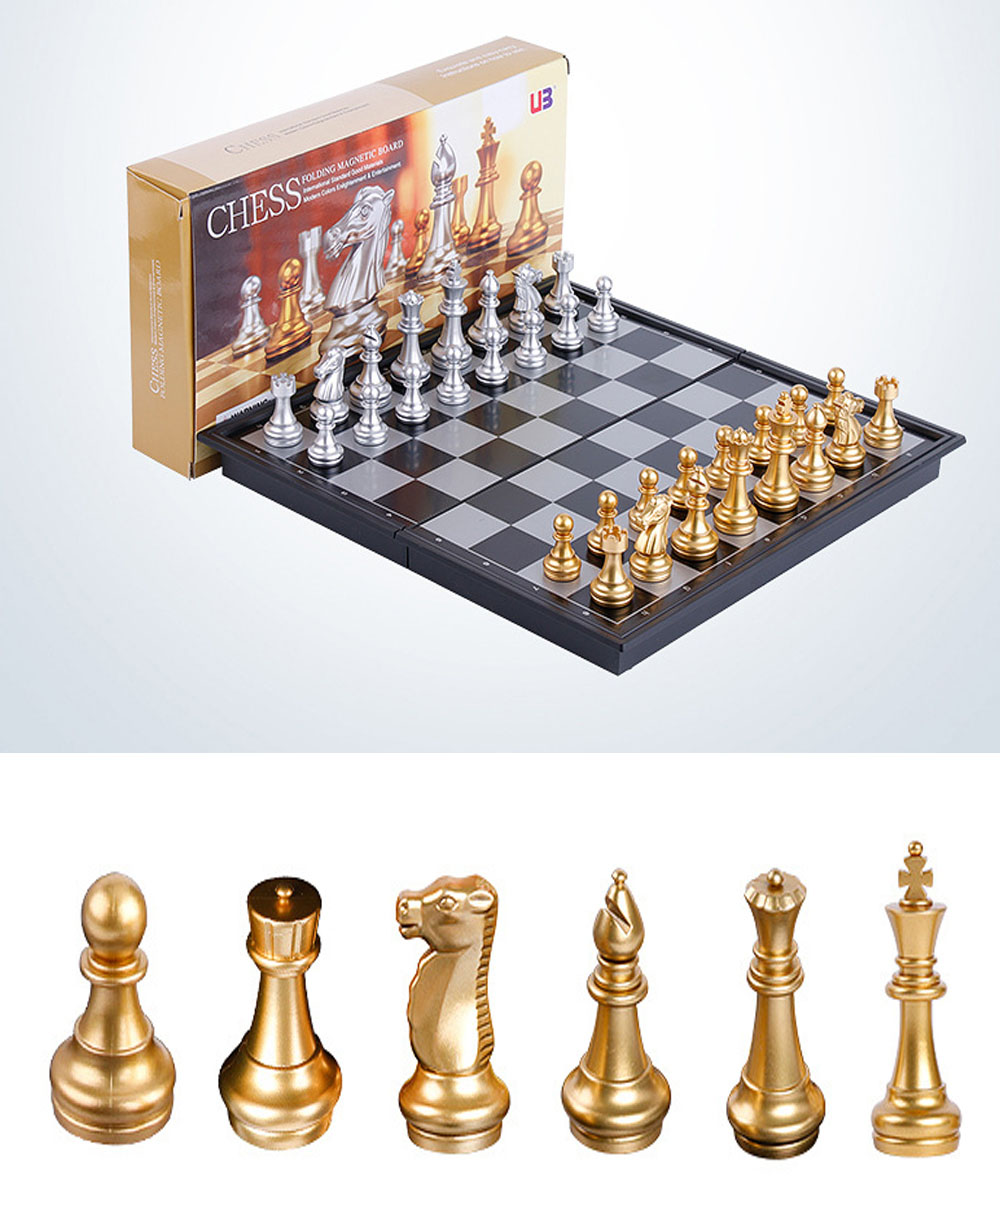 32PCS-Medieval-Chess-Set-With-High-Quality-Chessboard-Gold-Silver-Chess-Pieces-Magnetic-Board-Game-C-1841255-1